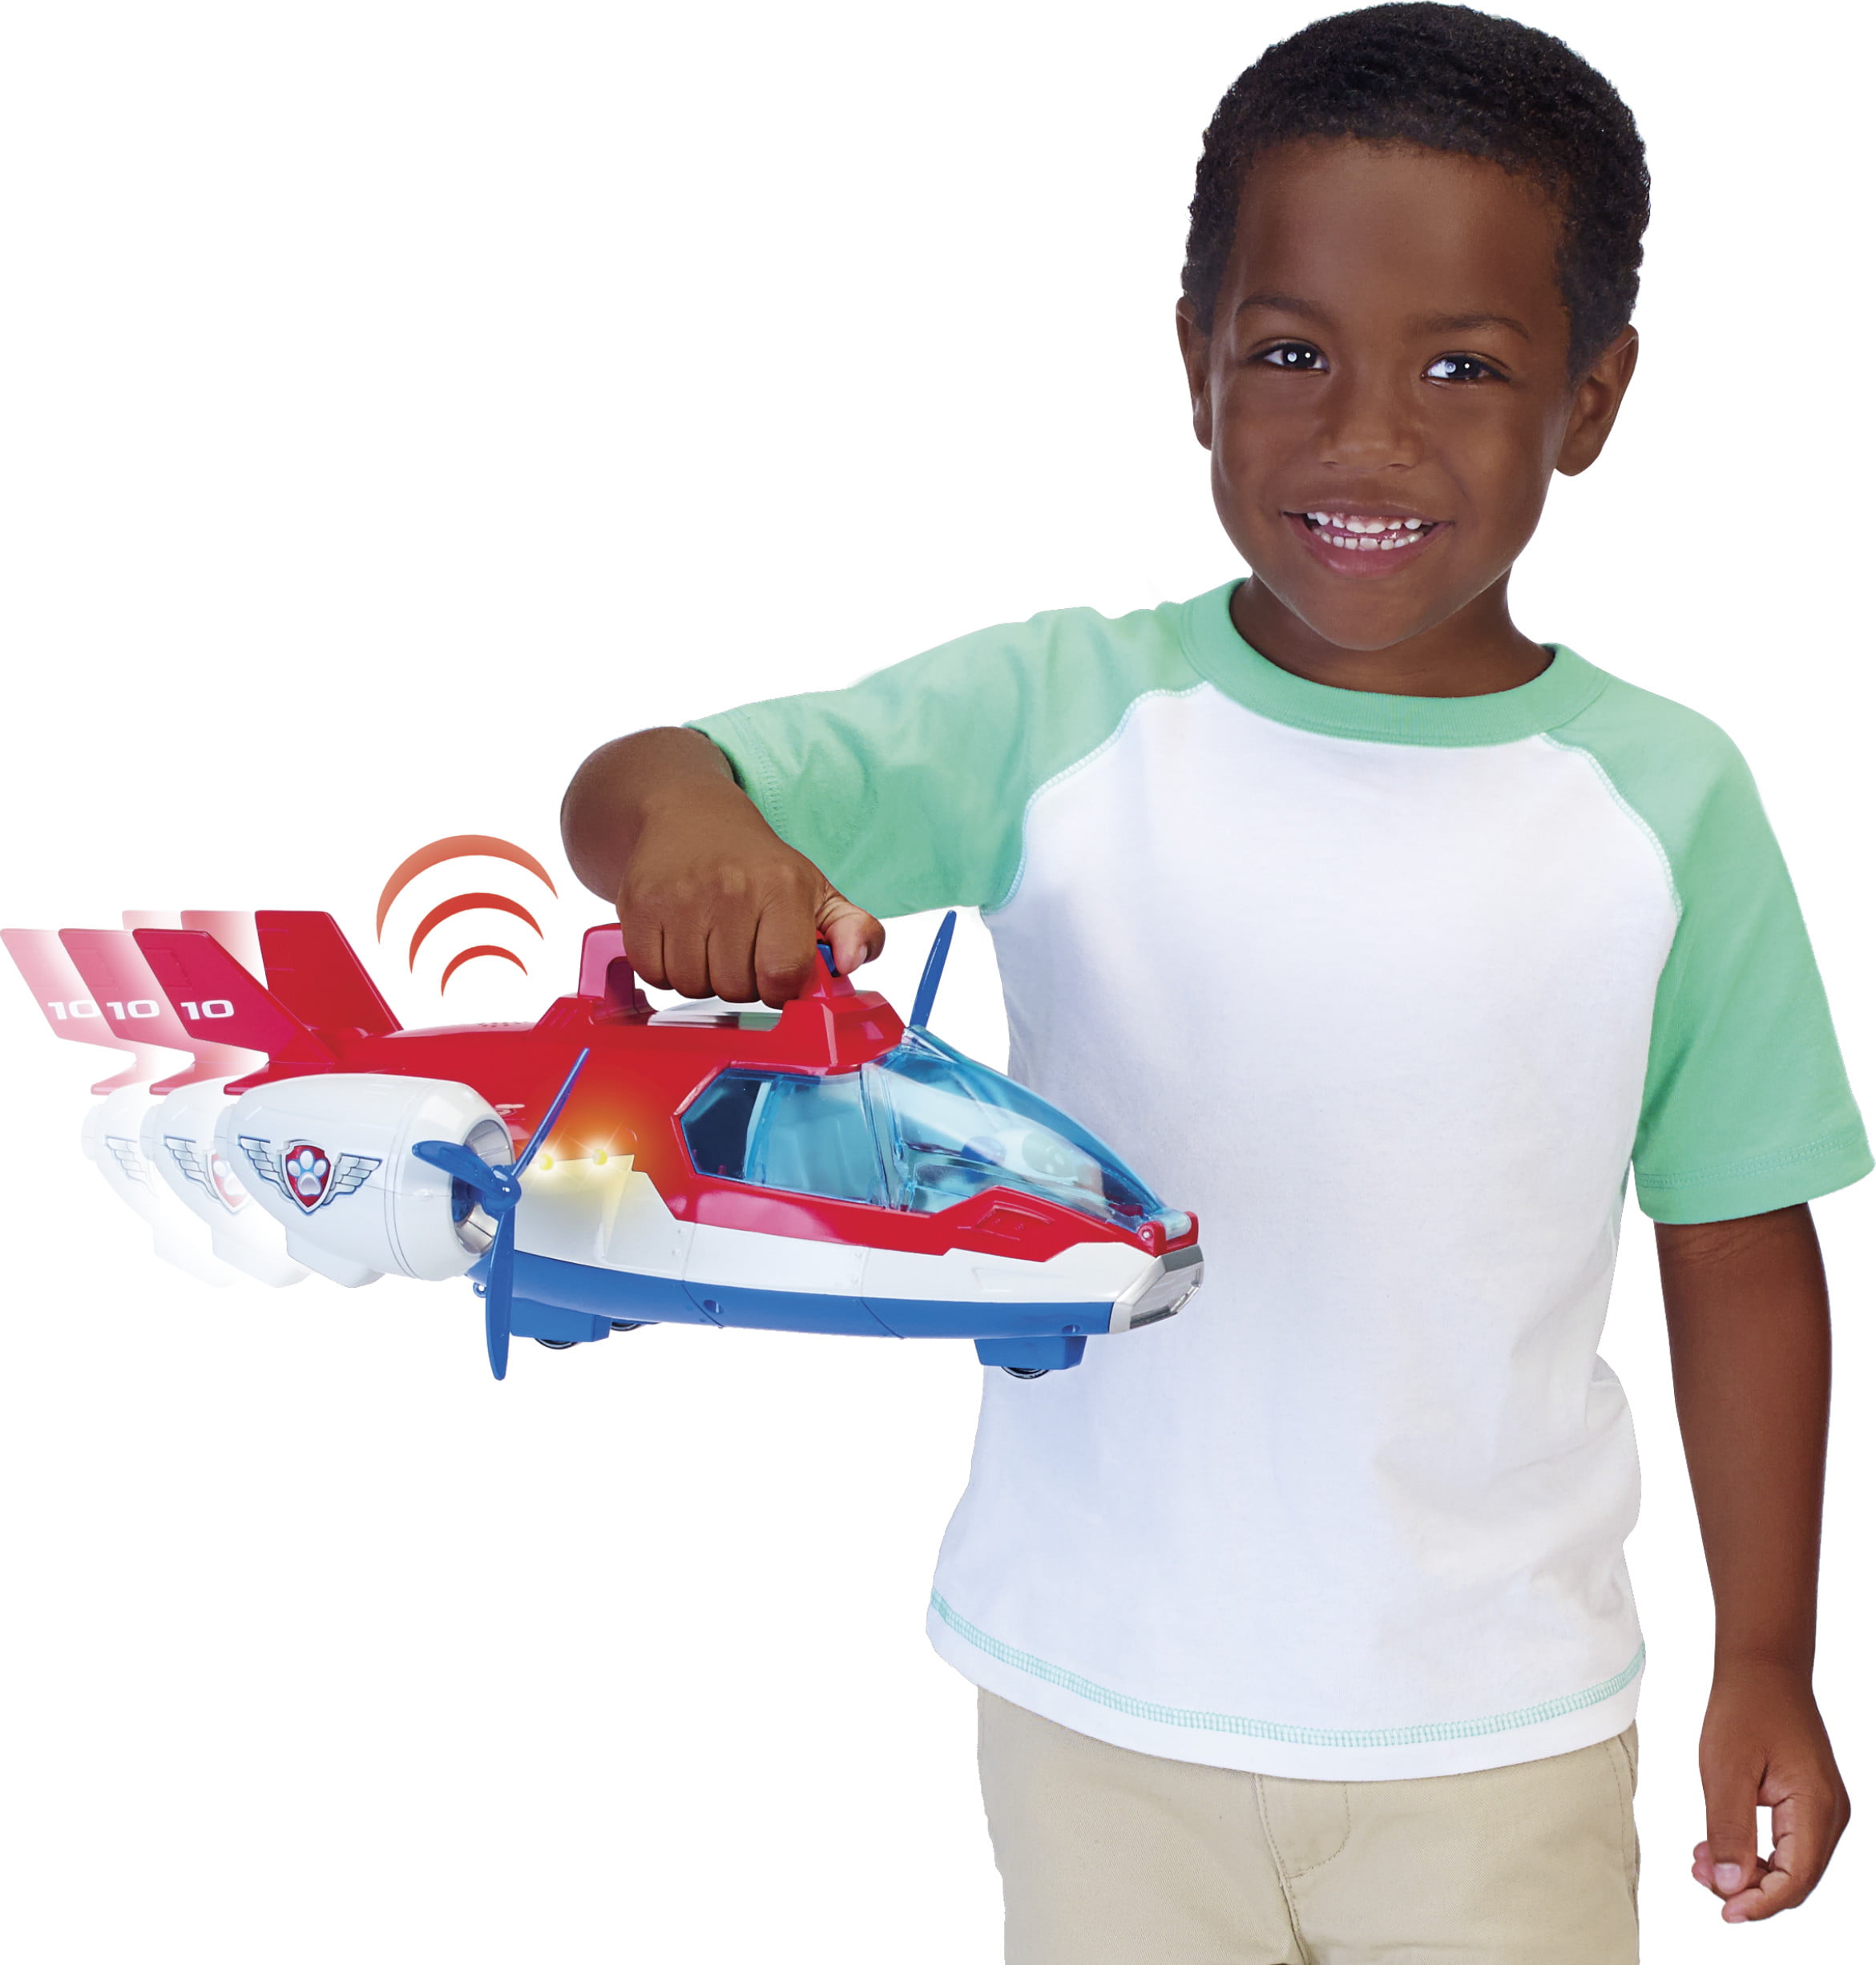 Paw Patrol, Lights and Sounds Air Patroller Plane - 2